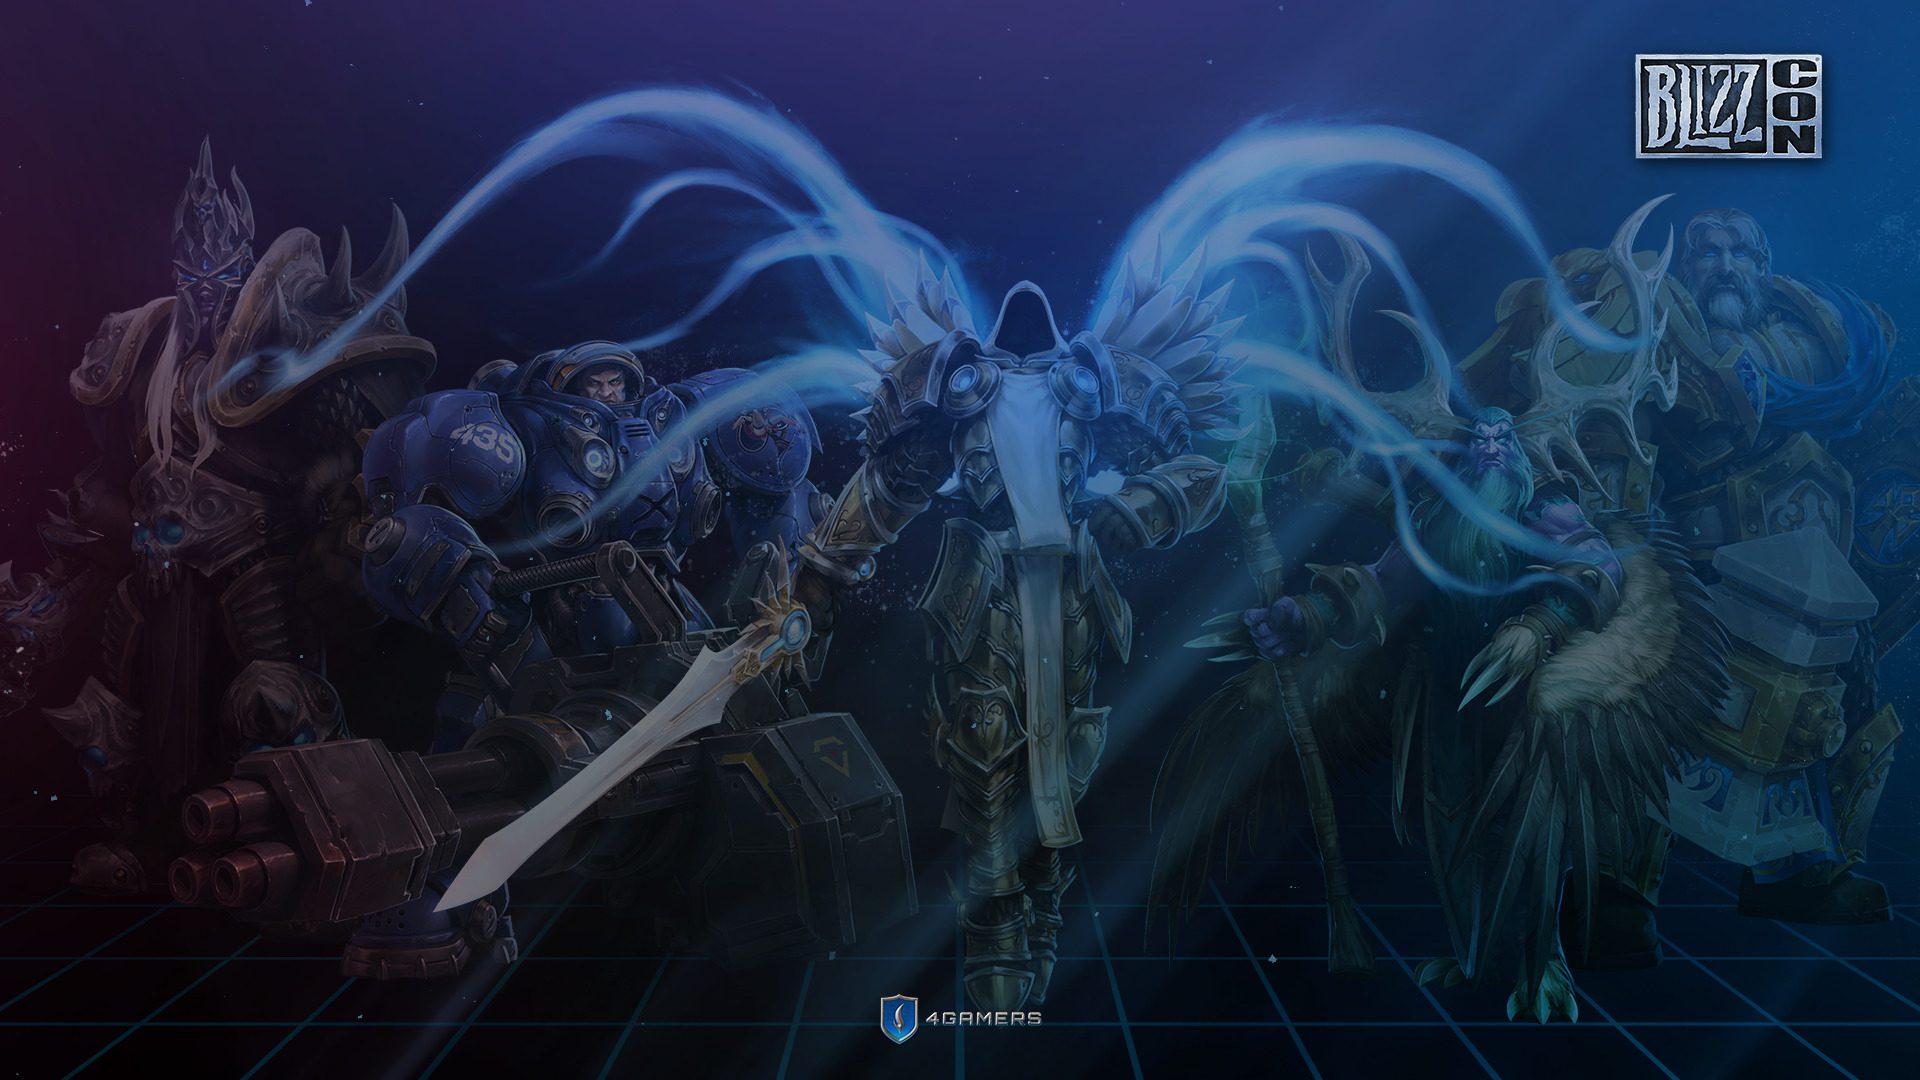 Blizzard Entertainment, Starcraft II, World Of Warcraft, 4Gamers, BlizzCon, Video Games, Heroes Of The Storm Wallpaper